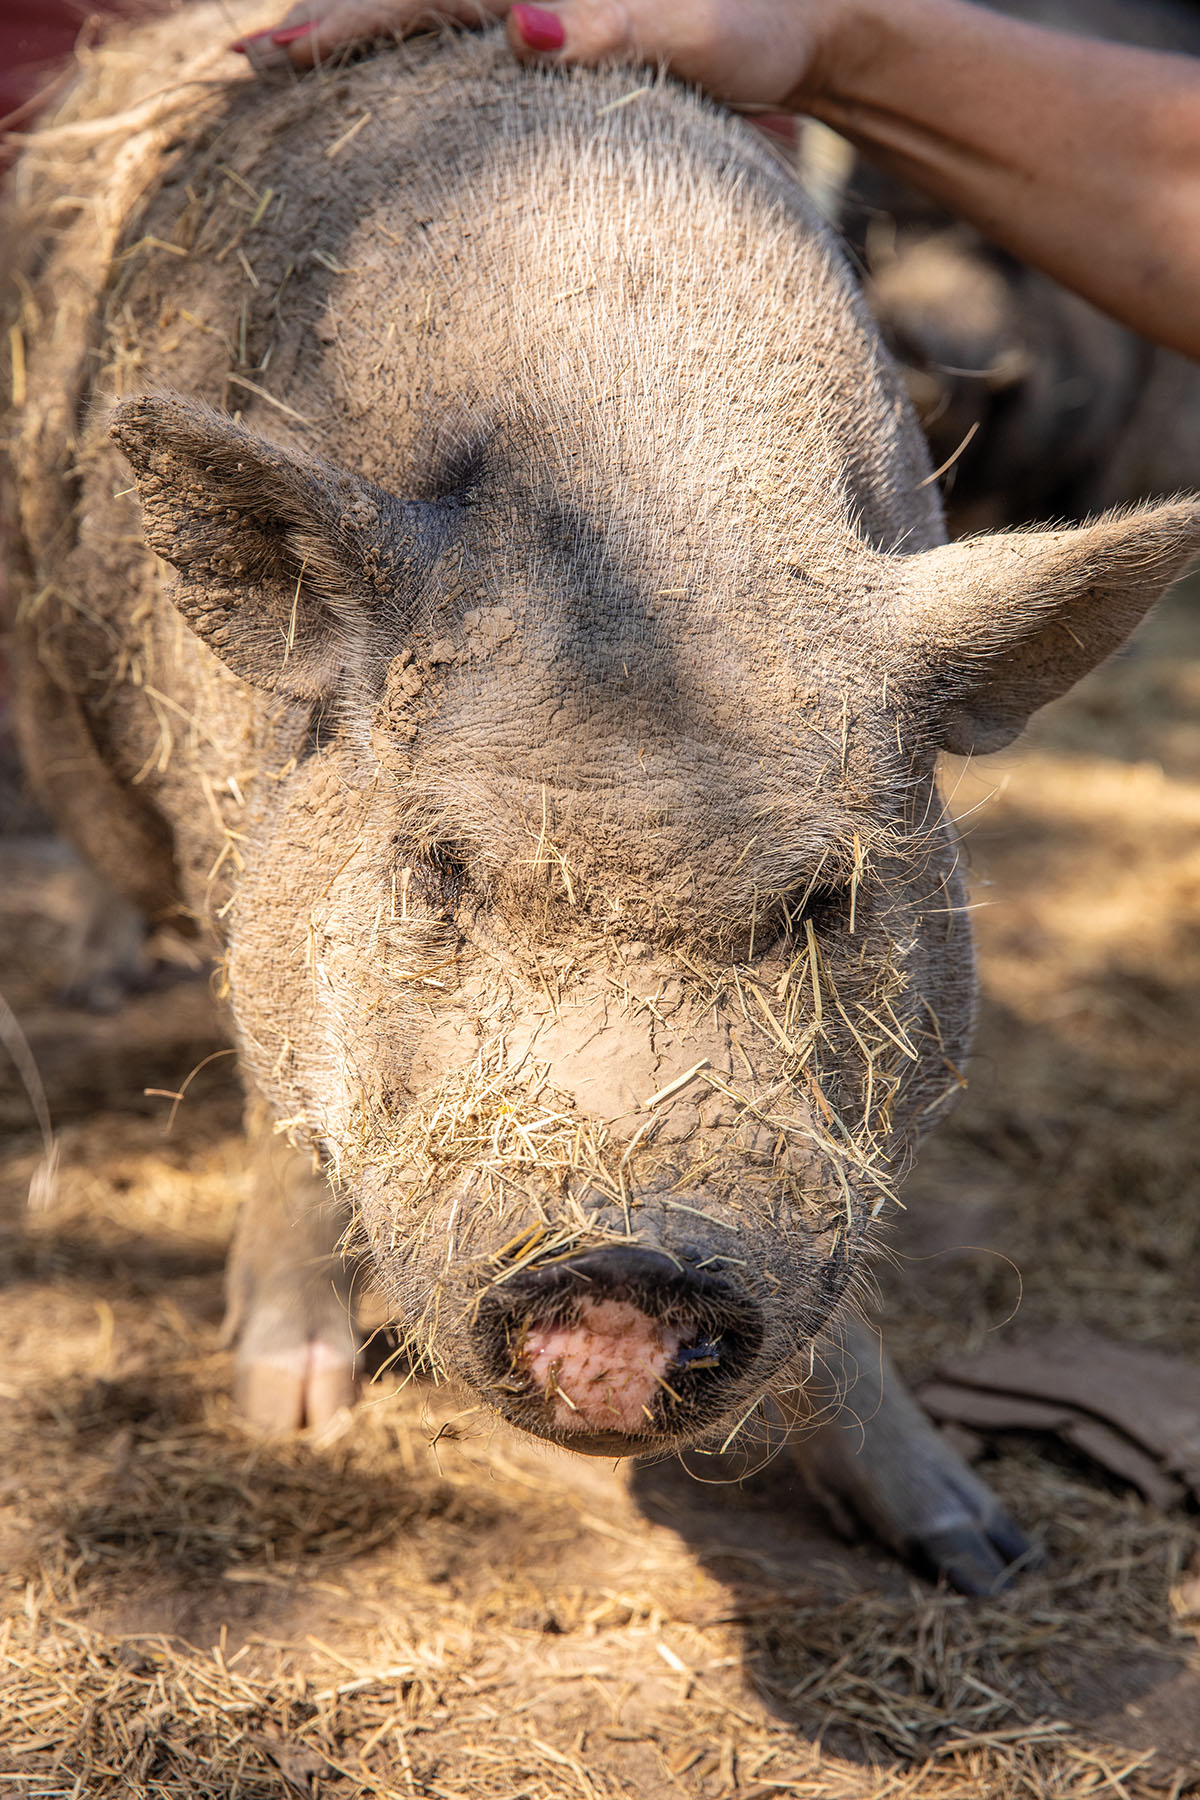 A closeup image of a gray pig with straw on its snout